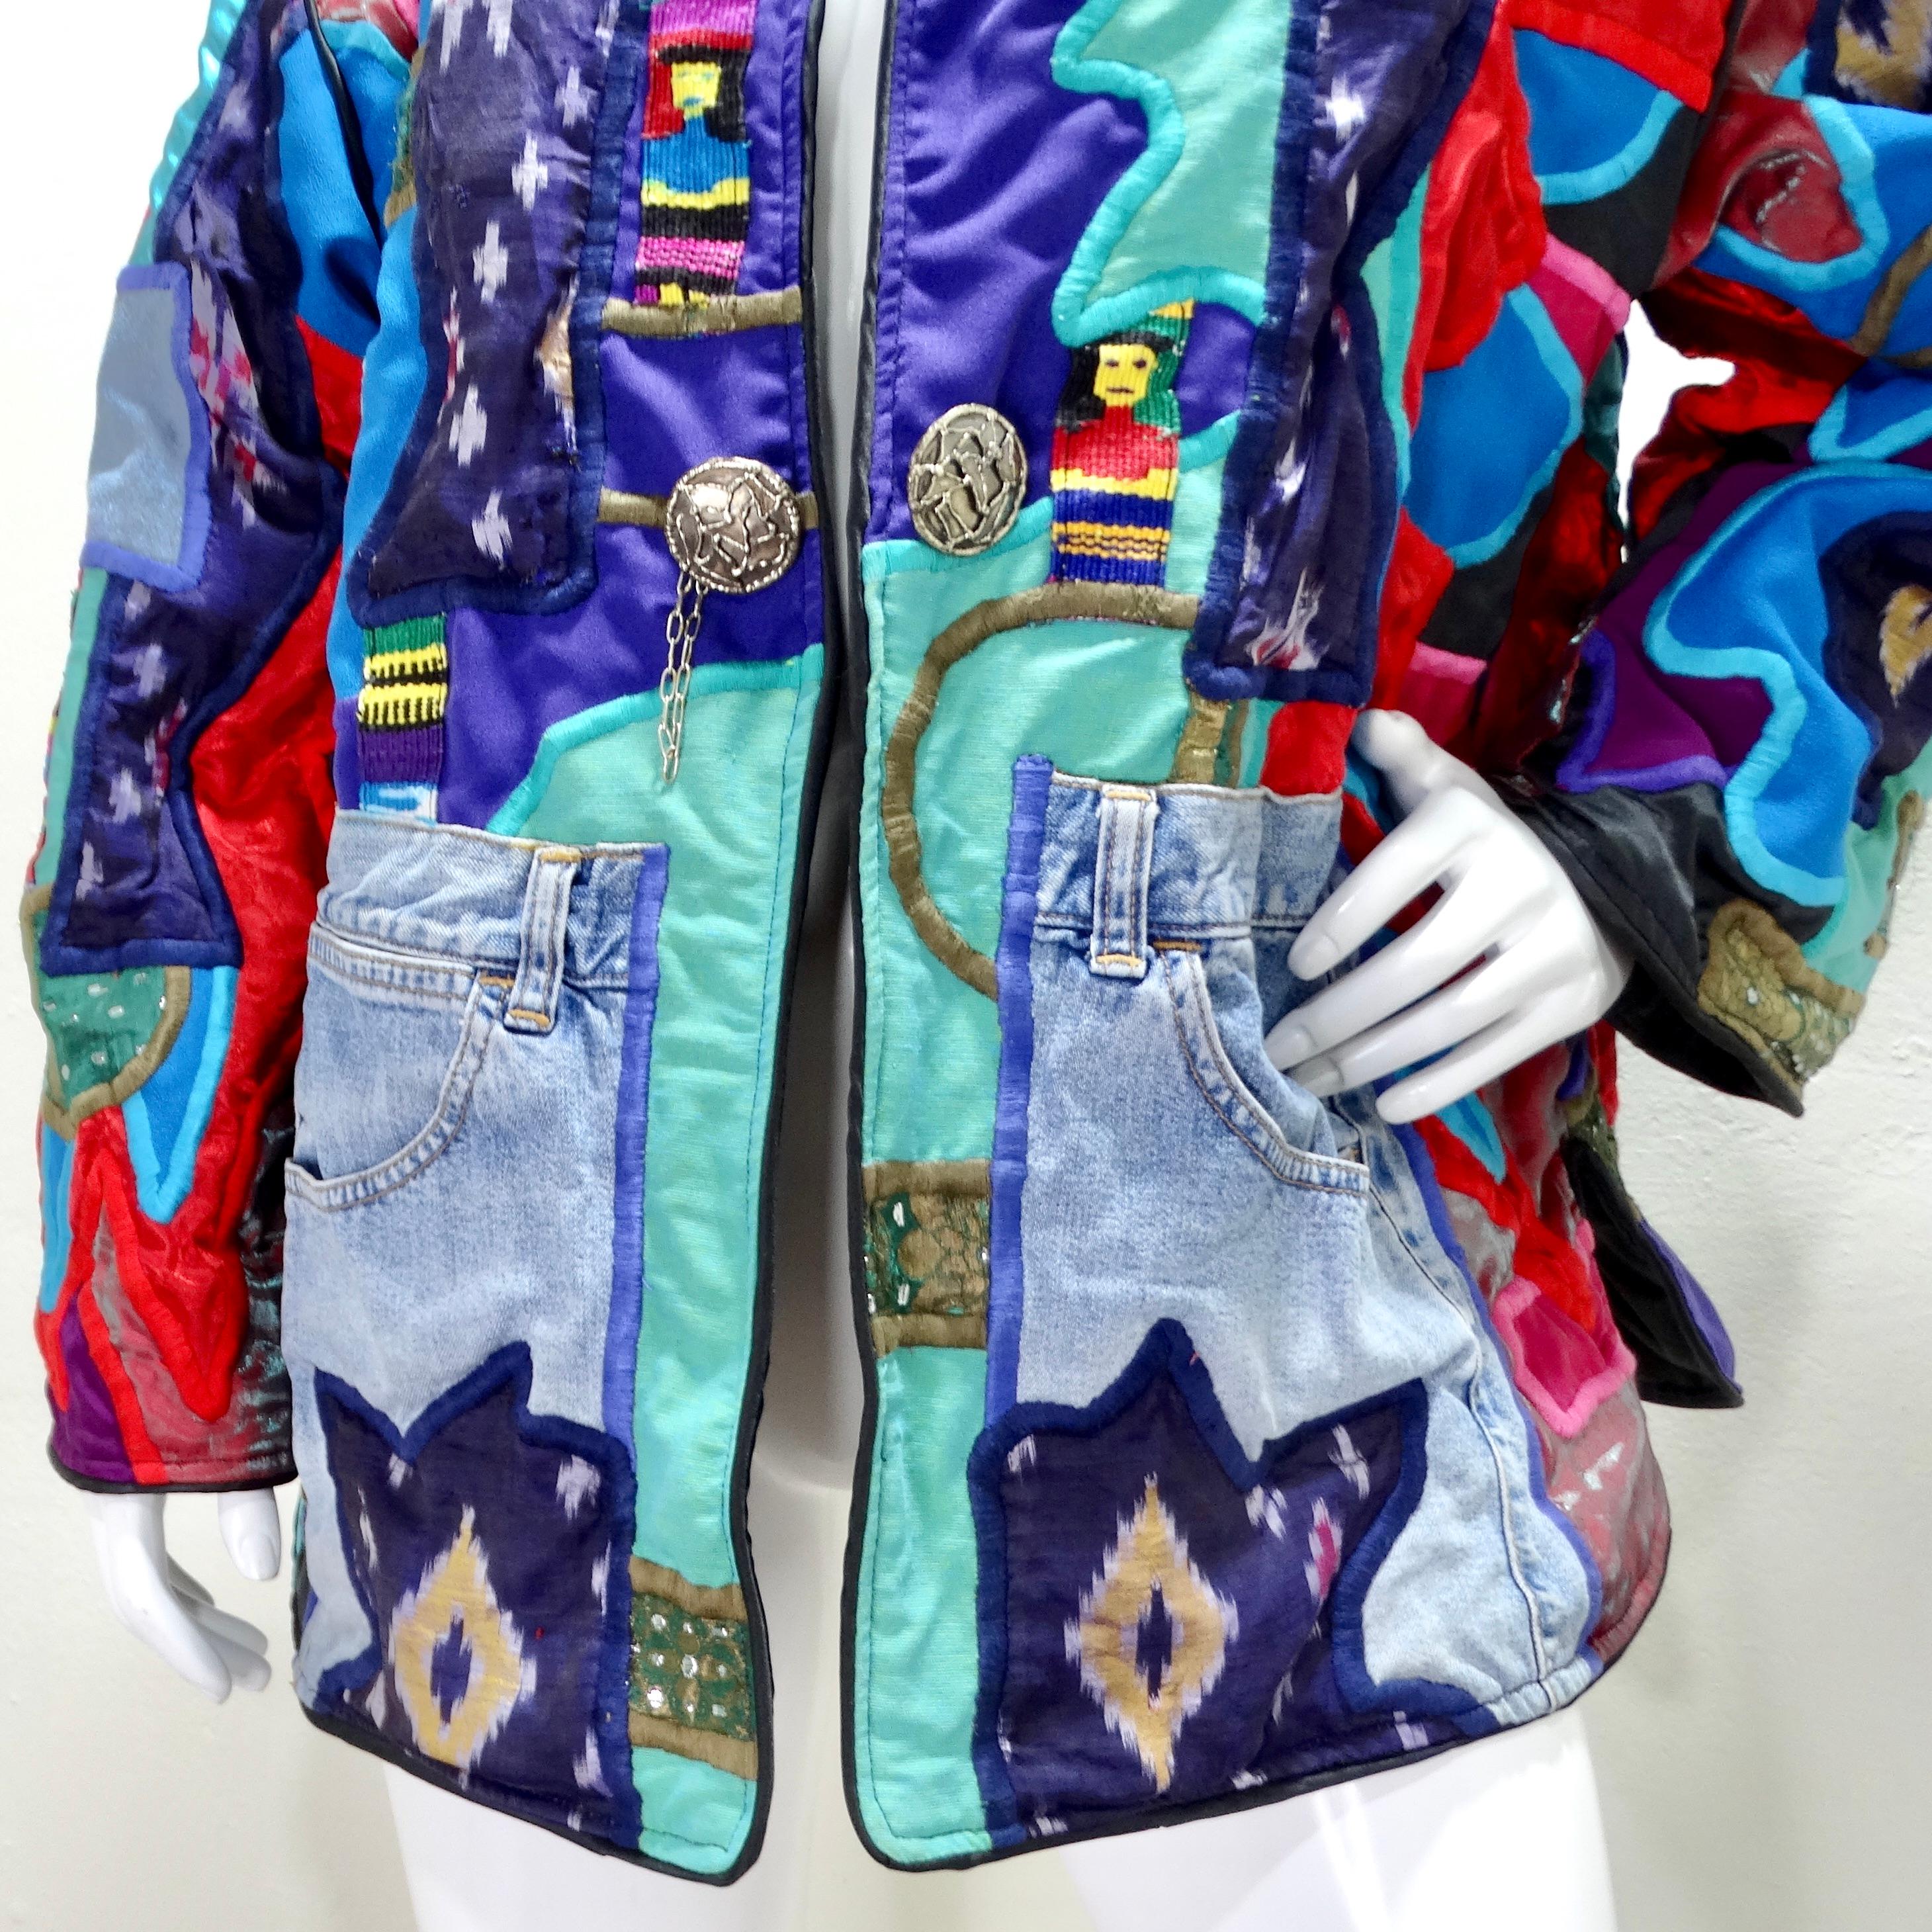 Introducing the 1980s La Colección Judith Roberts Patchwork Jacket, a vibrant and unique statement piece that exudes creativity and craftsmanship. This multicolor patchwork jacket showcases a whimsical design, incorporating a diverse array of woven,